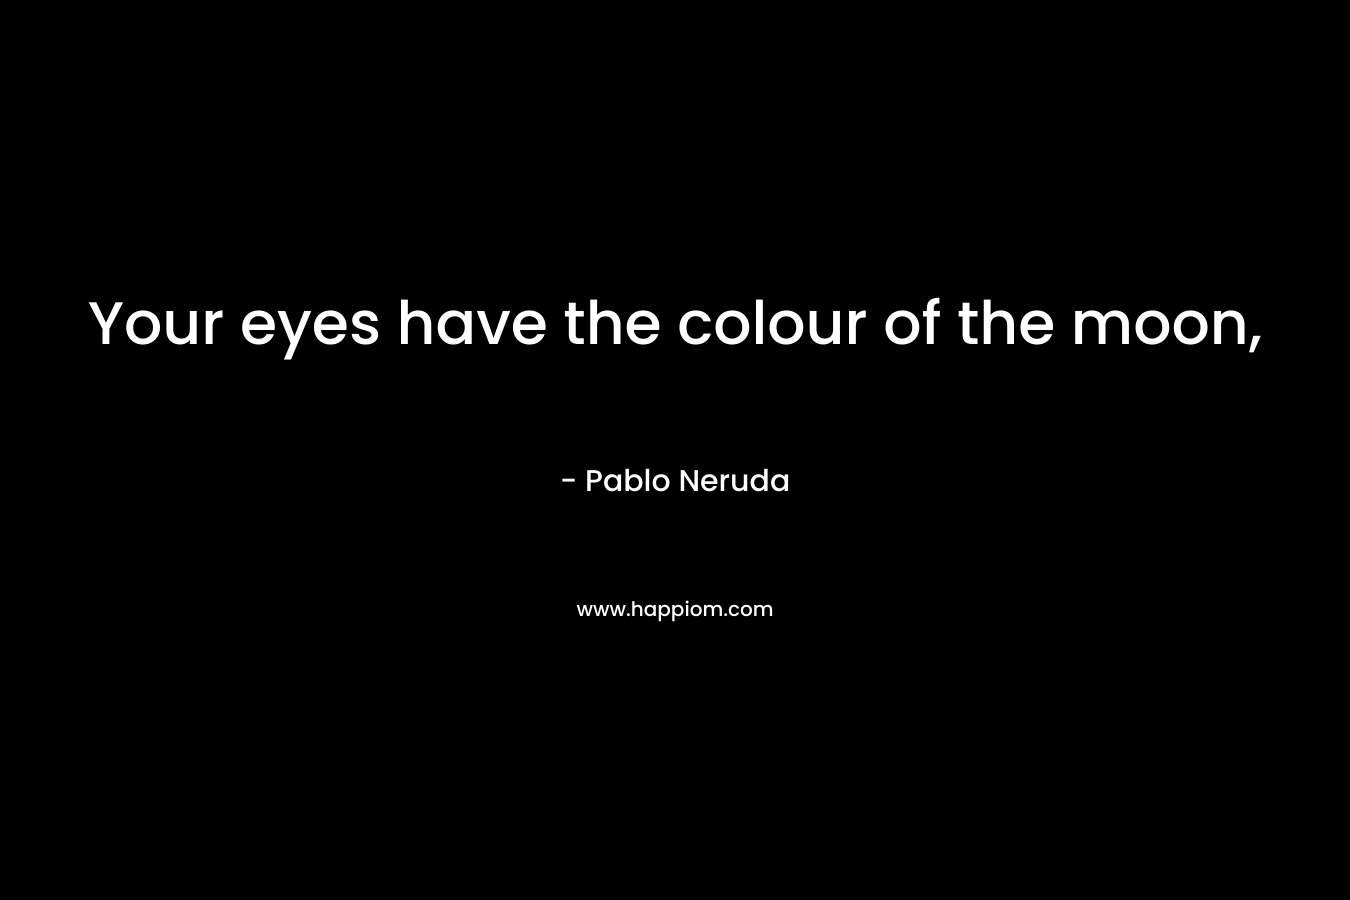 Your eyes have the colour of the moon, – Pablo Neruda